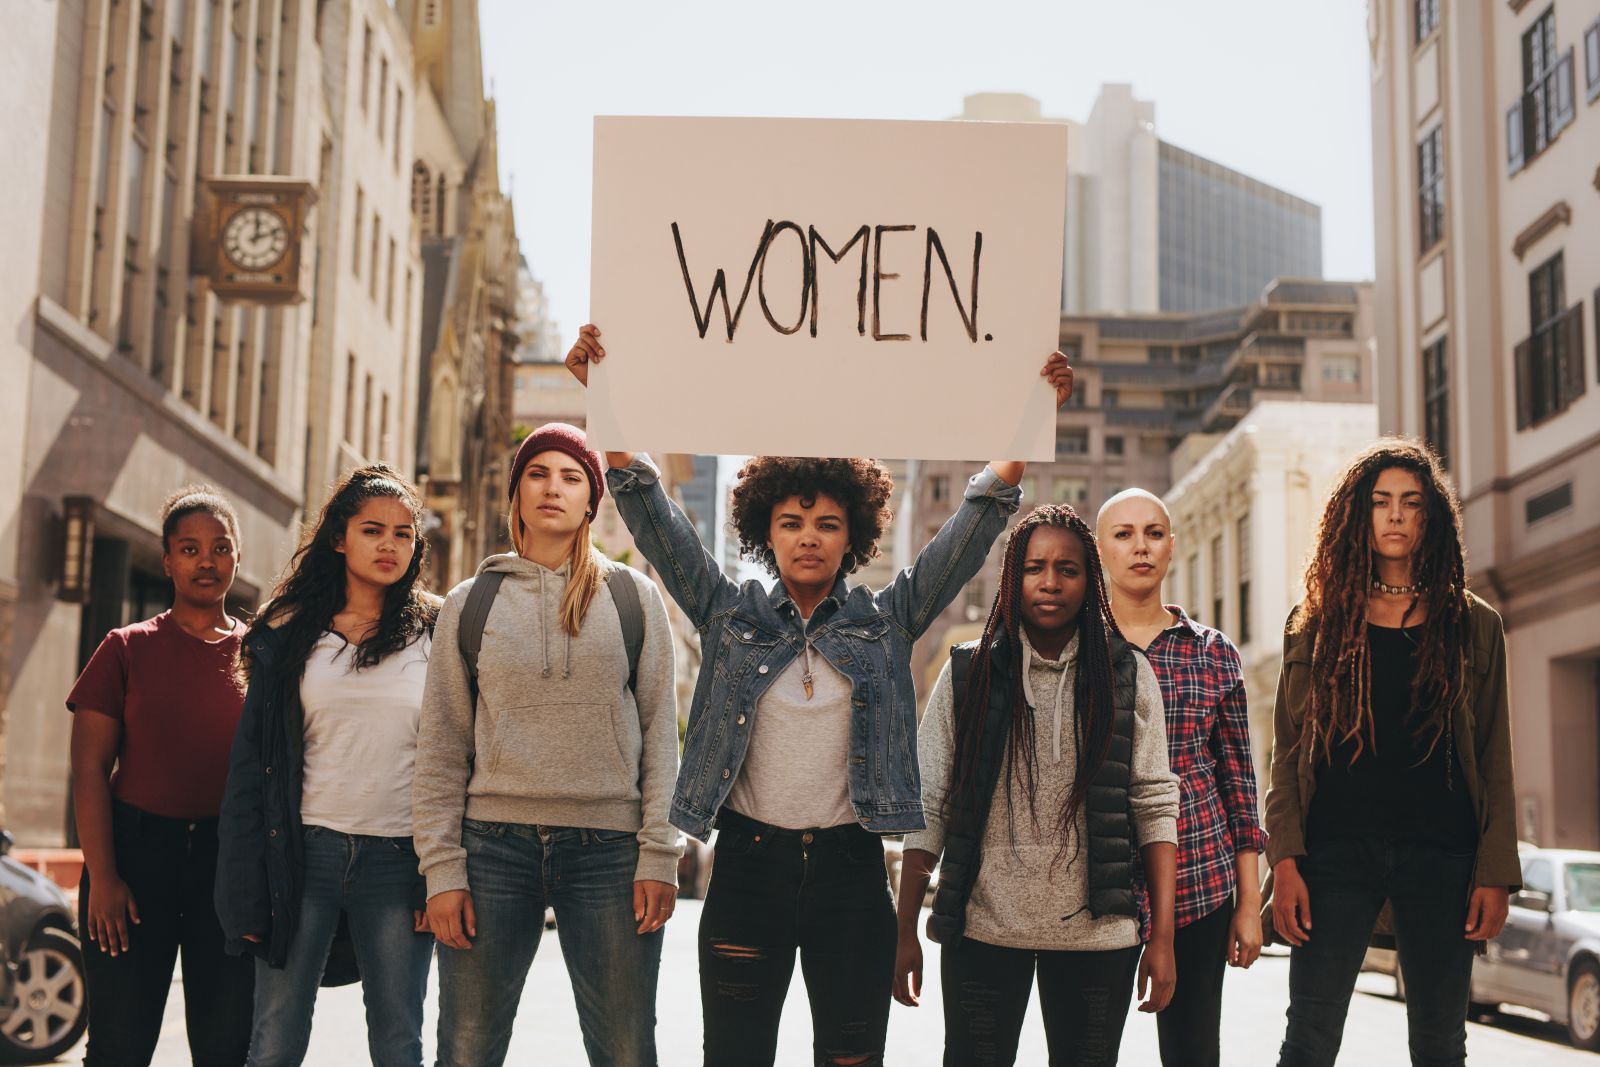 Group of women standing together with the front women holding a sign that says Women